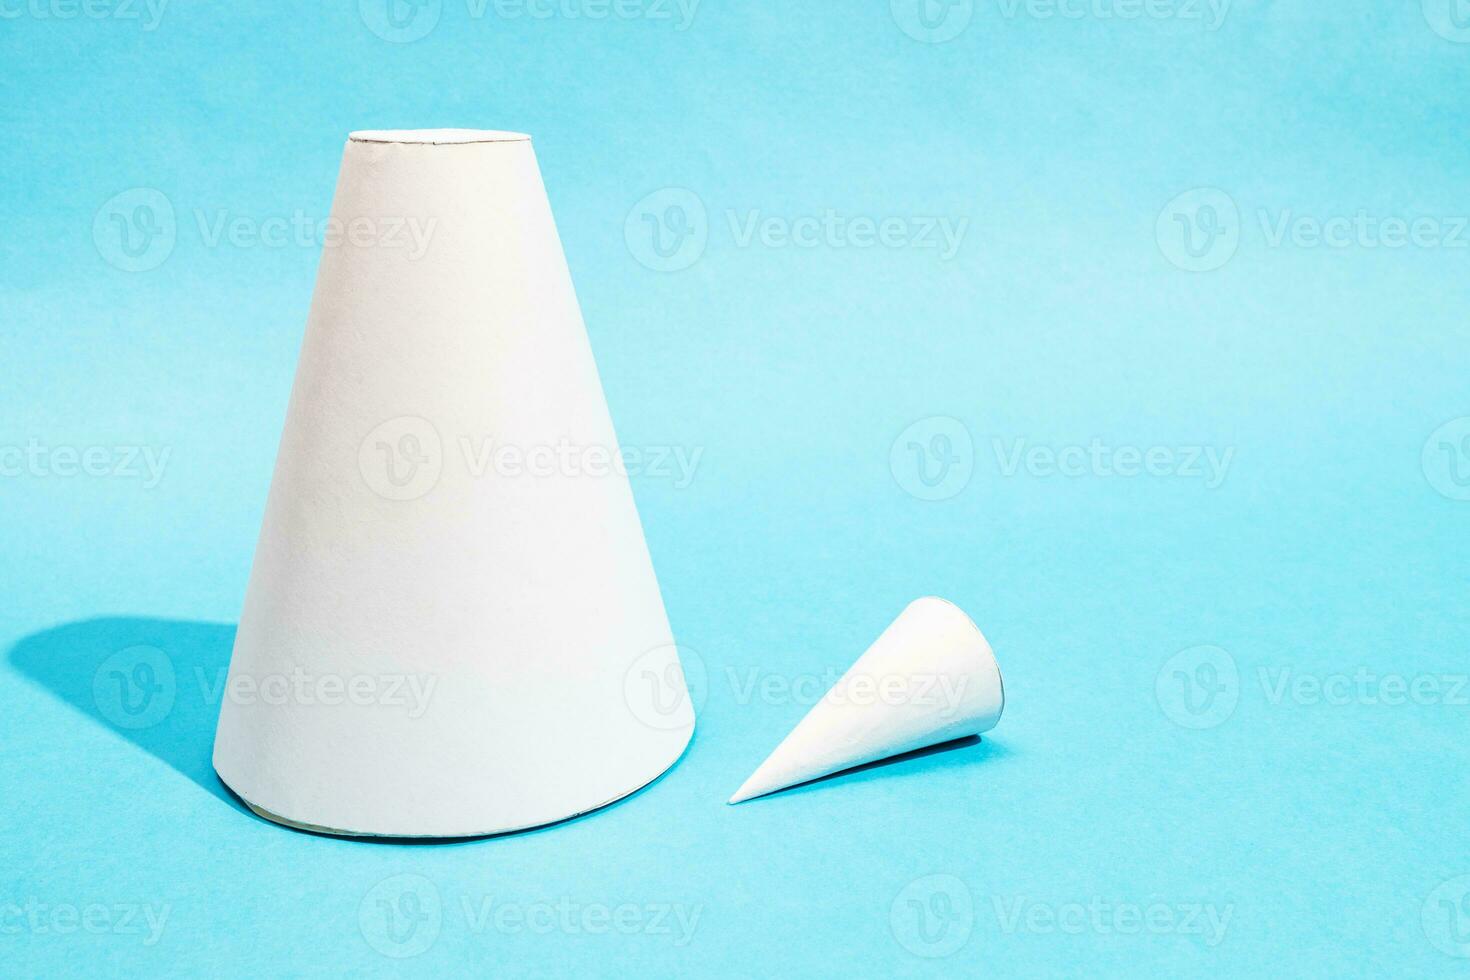 hand-crafted paper frustum cone and cone top photo